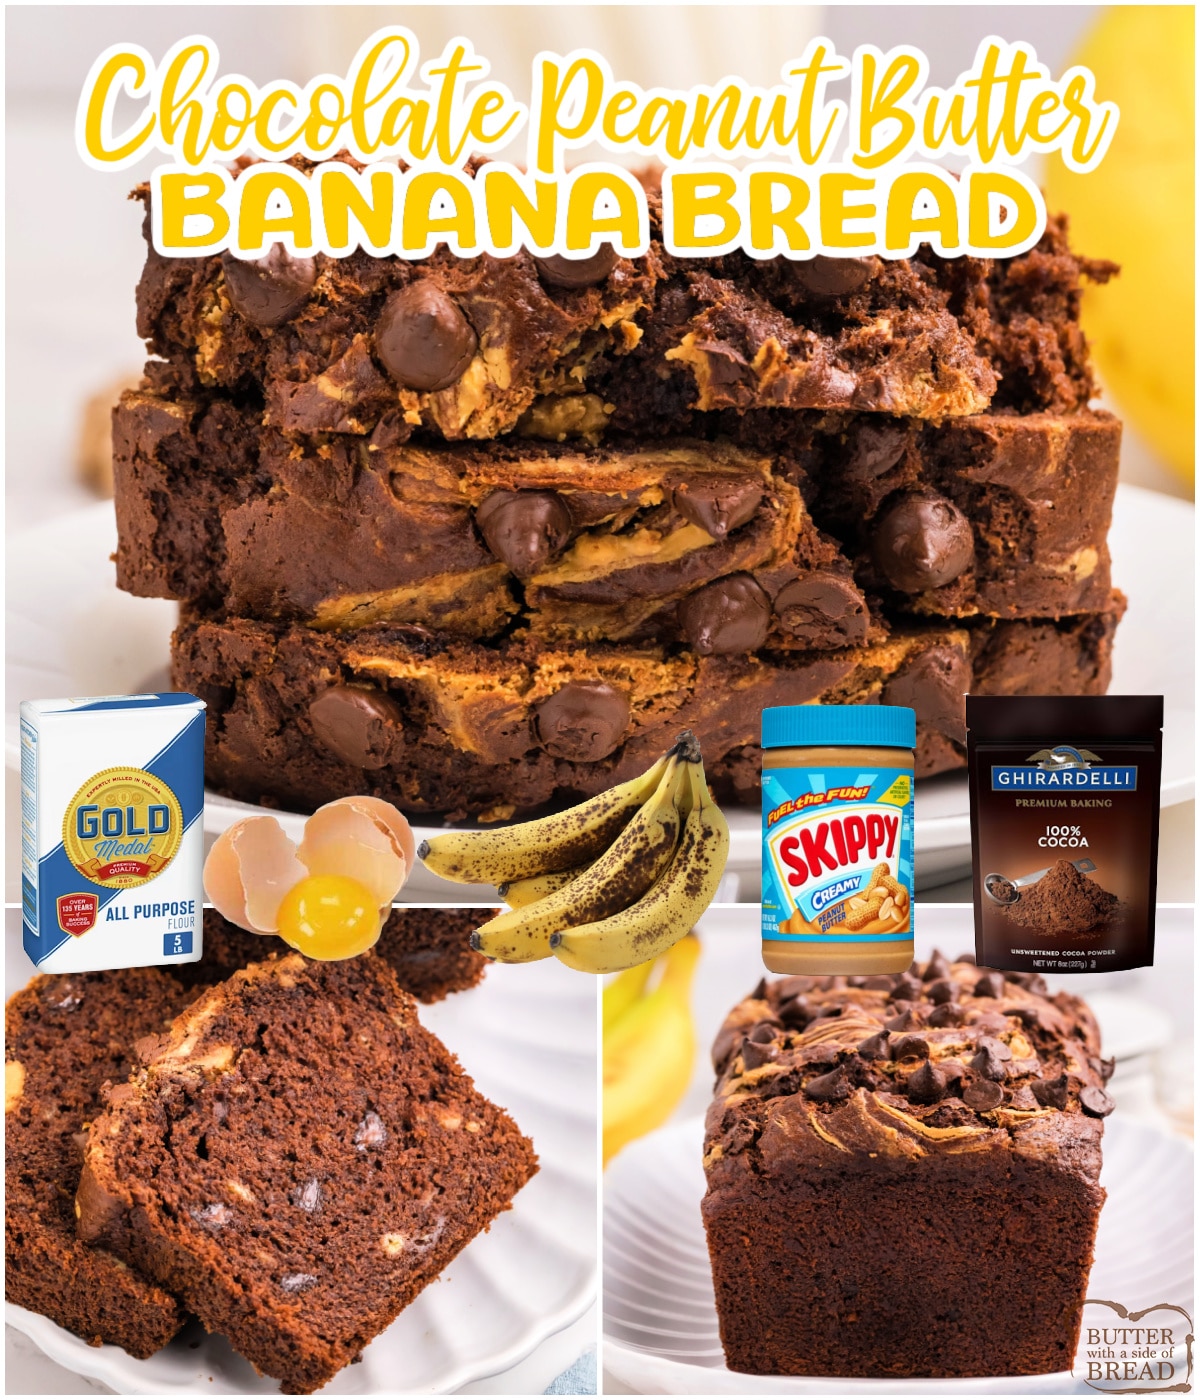 Chocolate Peanut Butter Banana Bread is a twist on the traditional banana bread recipe.  Banana bread is even better when you add chocolate and peanut butter! 